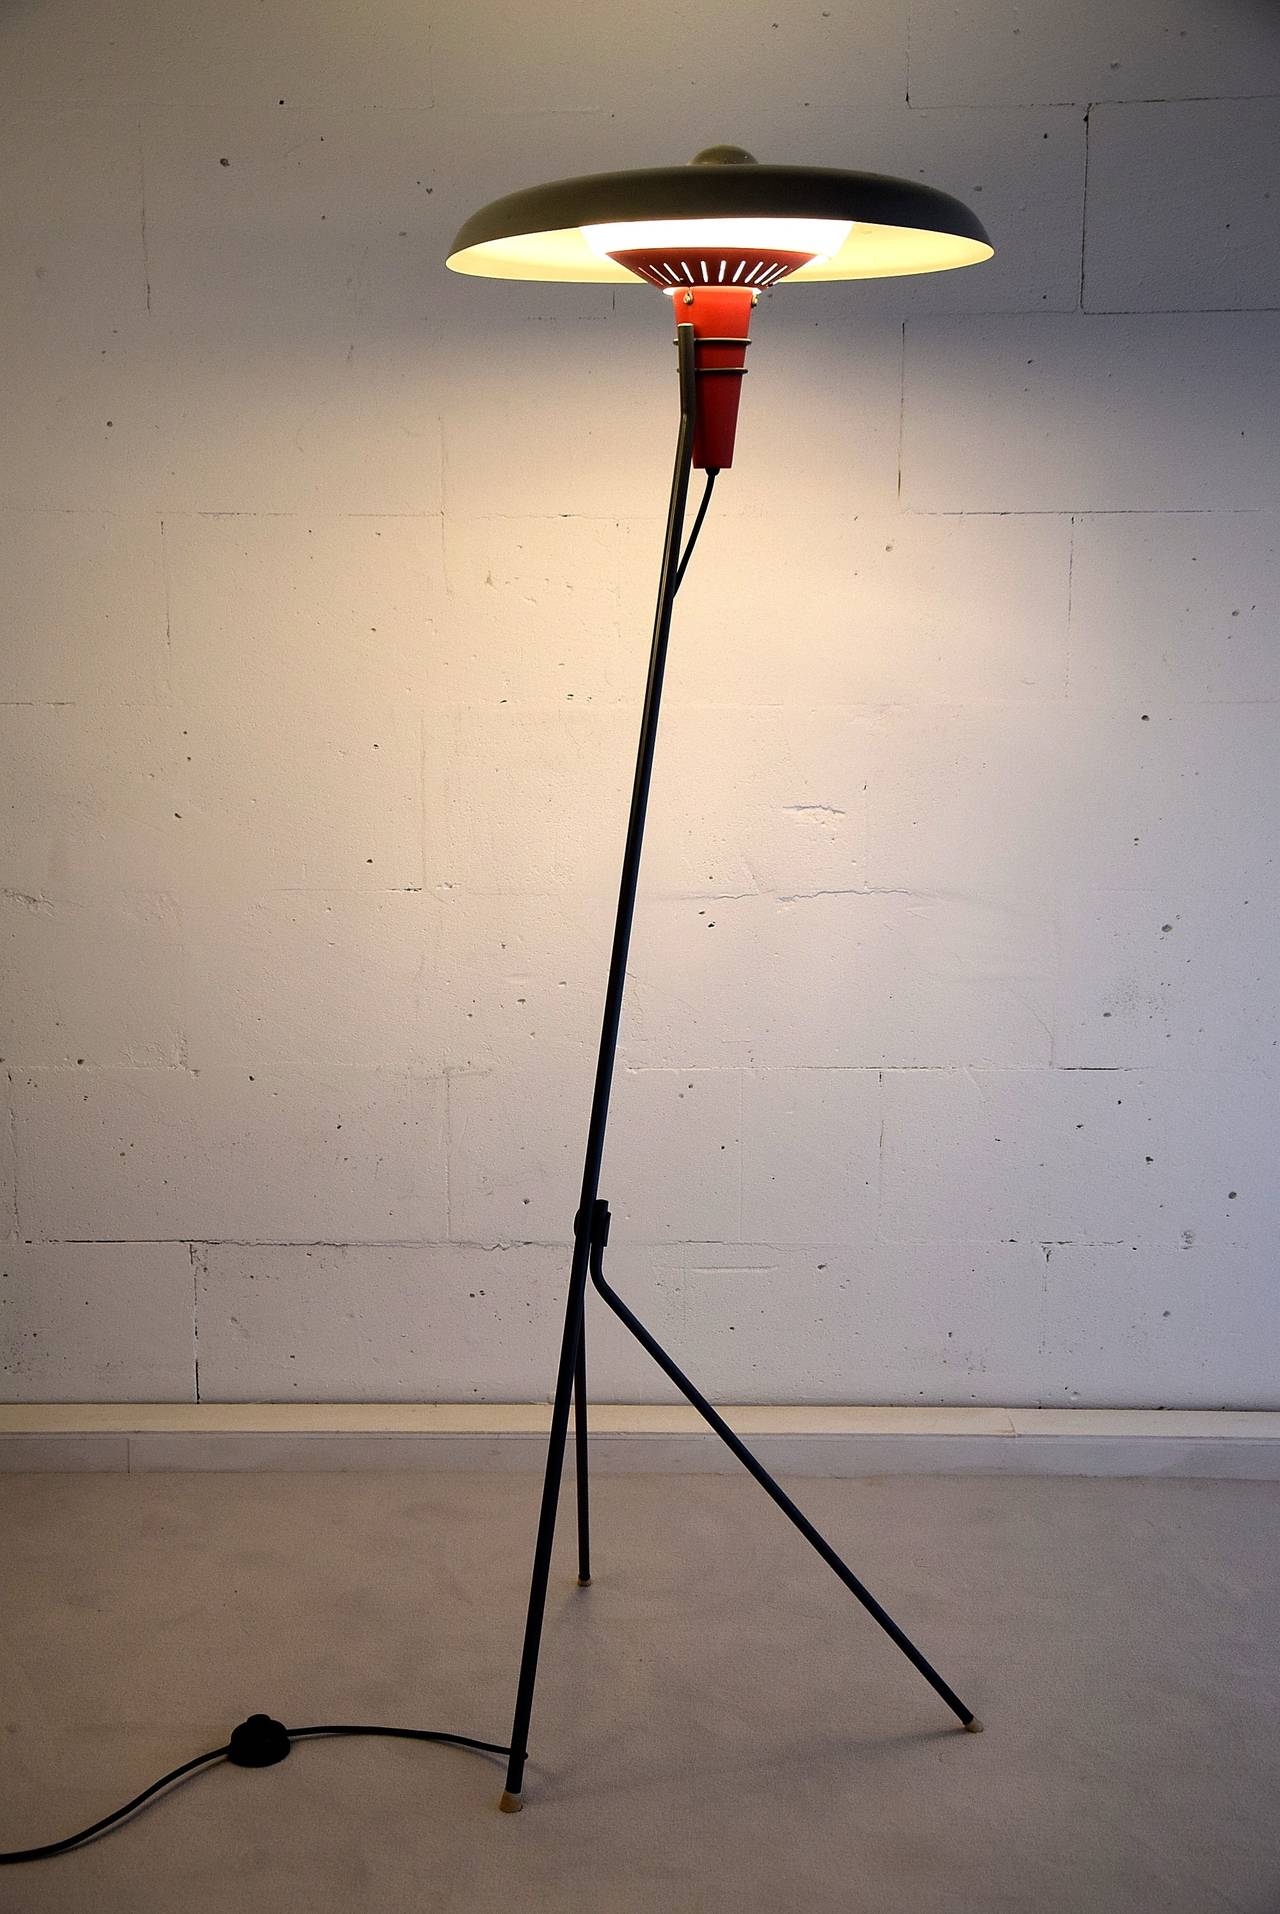 Louis Kalff Mid-Century Modern Philips floor lamp
An architectural very rare floor lamp in enameled institutional grey with red and mid-grey accents. 
Wire structure supporting the disc shade and plexiglass diffuser.
The lamp is in very good